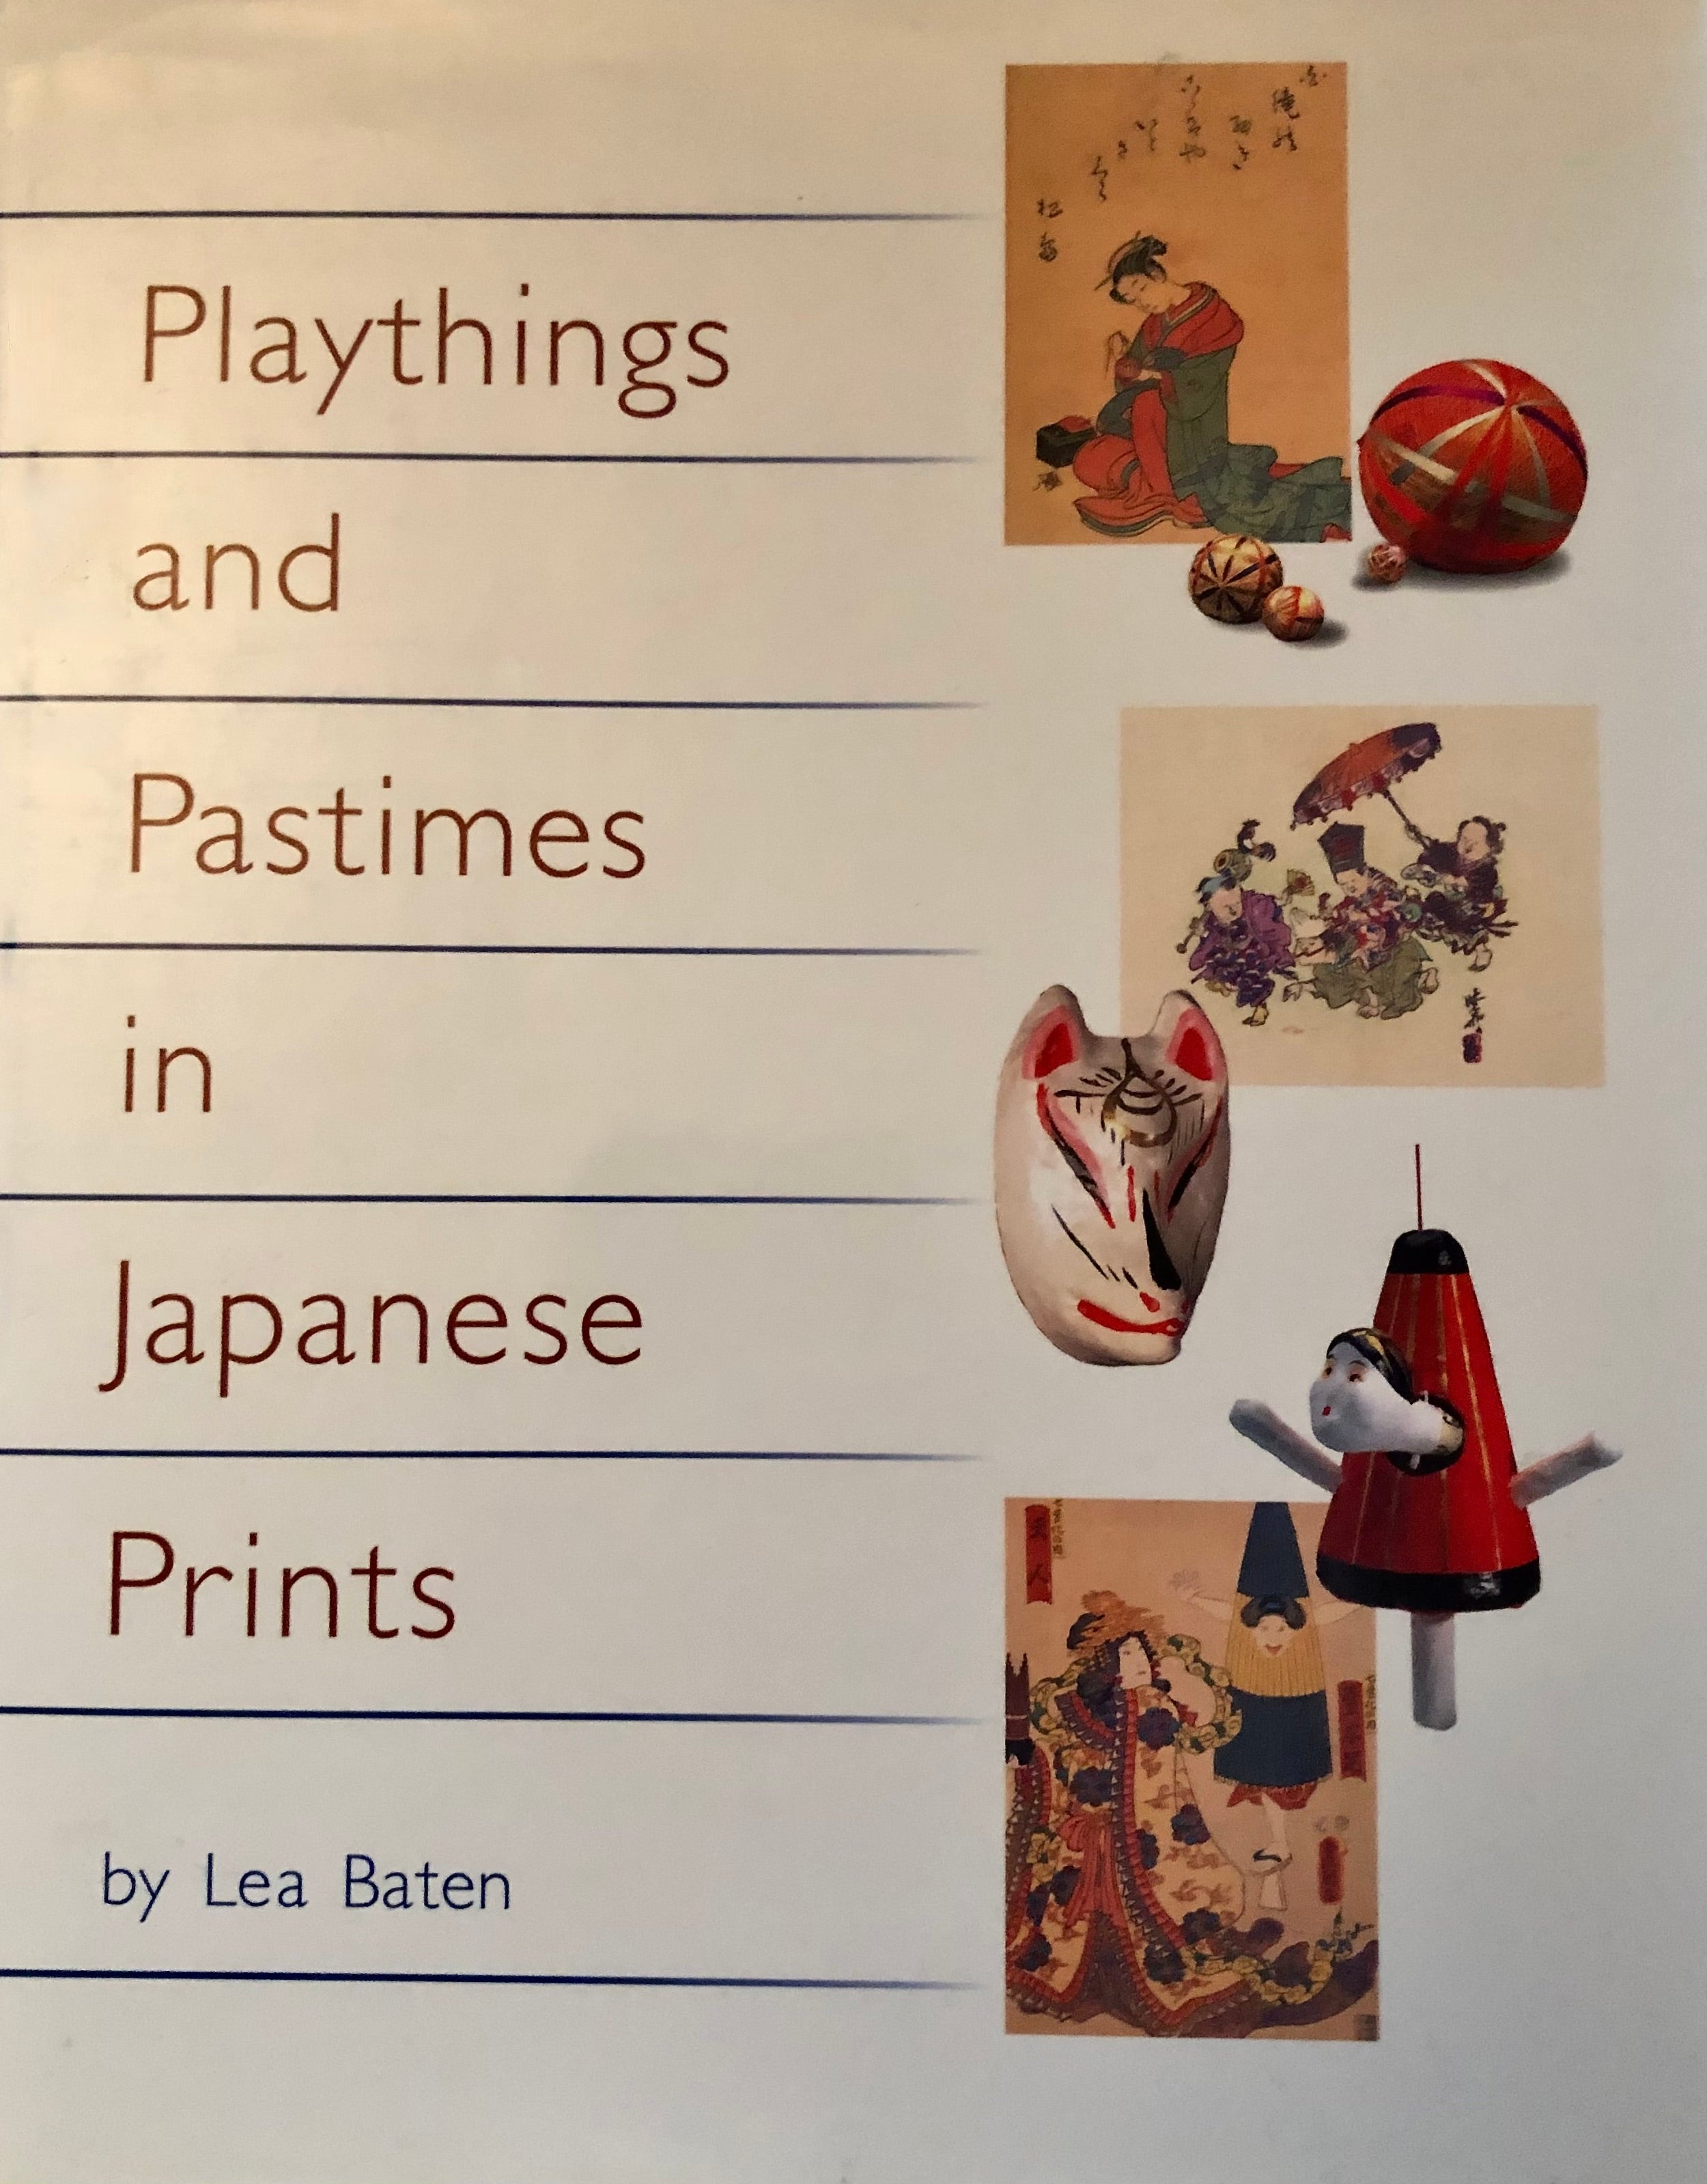 Playthings and Pastimes in Japanese Prints by Lea Baten